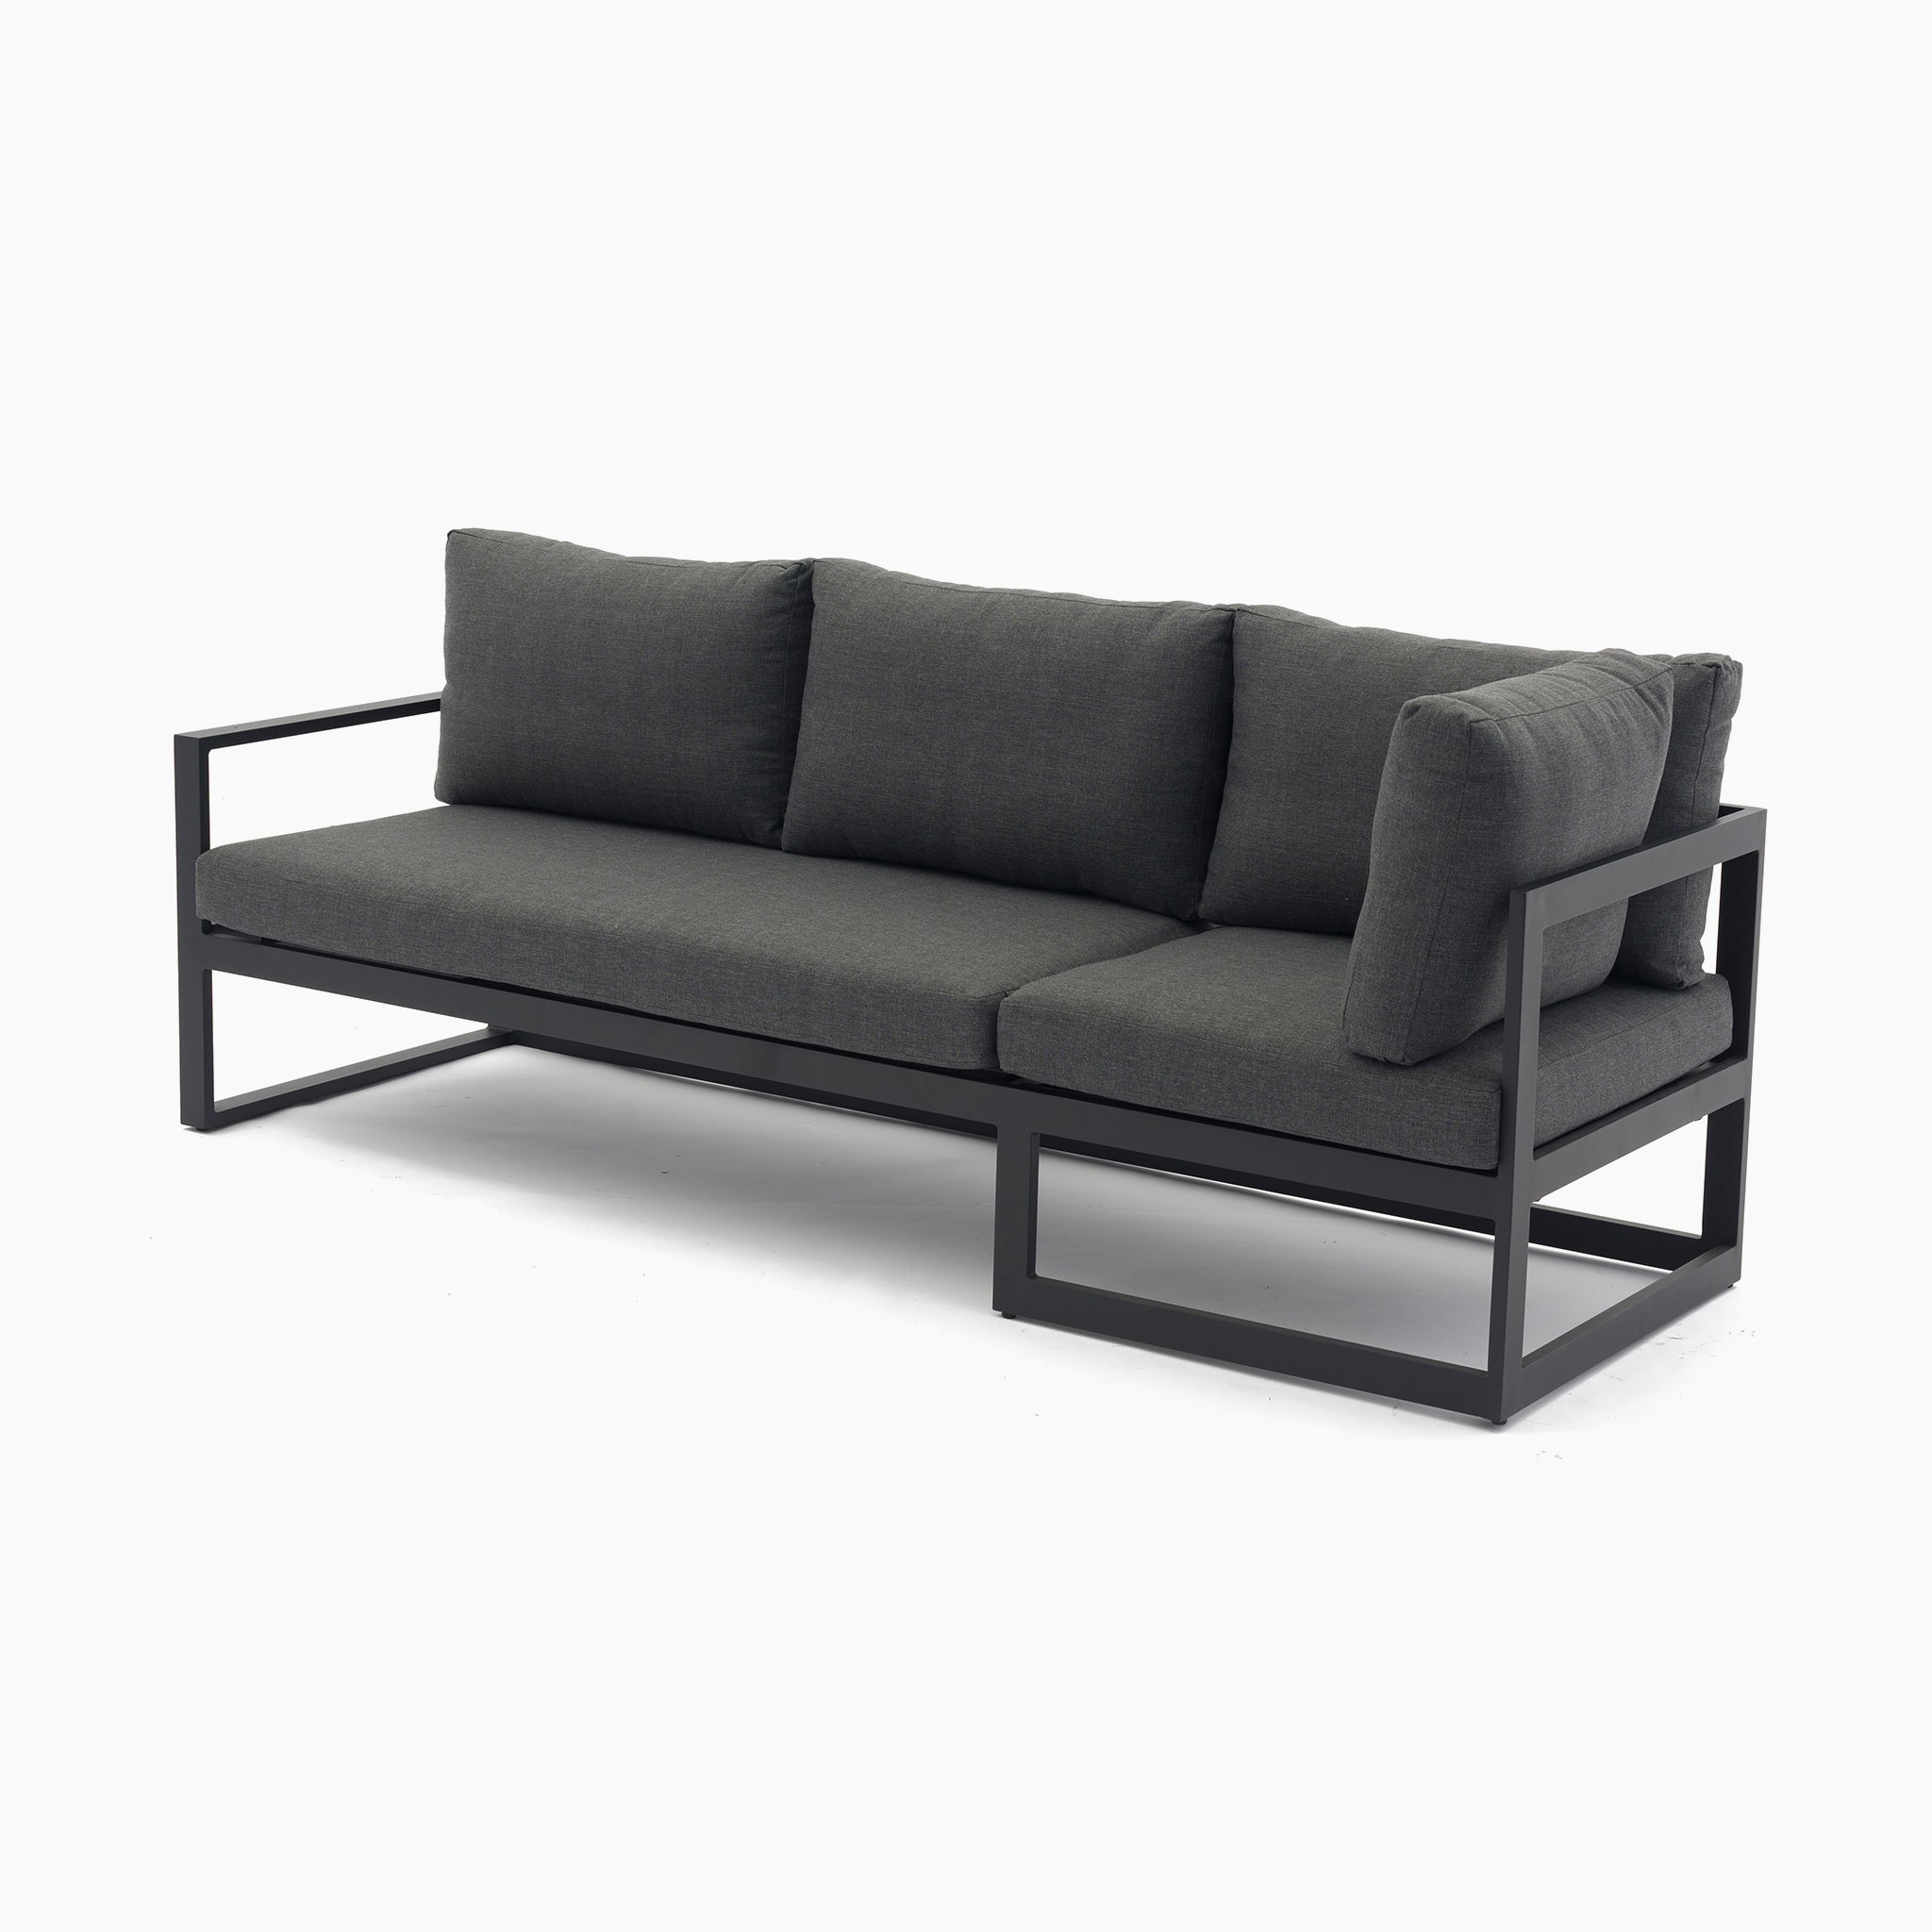 Havana Corner Group Set with Reclining Feature and Coffee Table in Charcoal